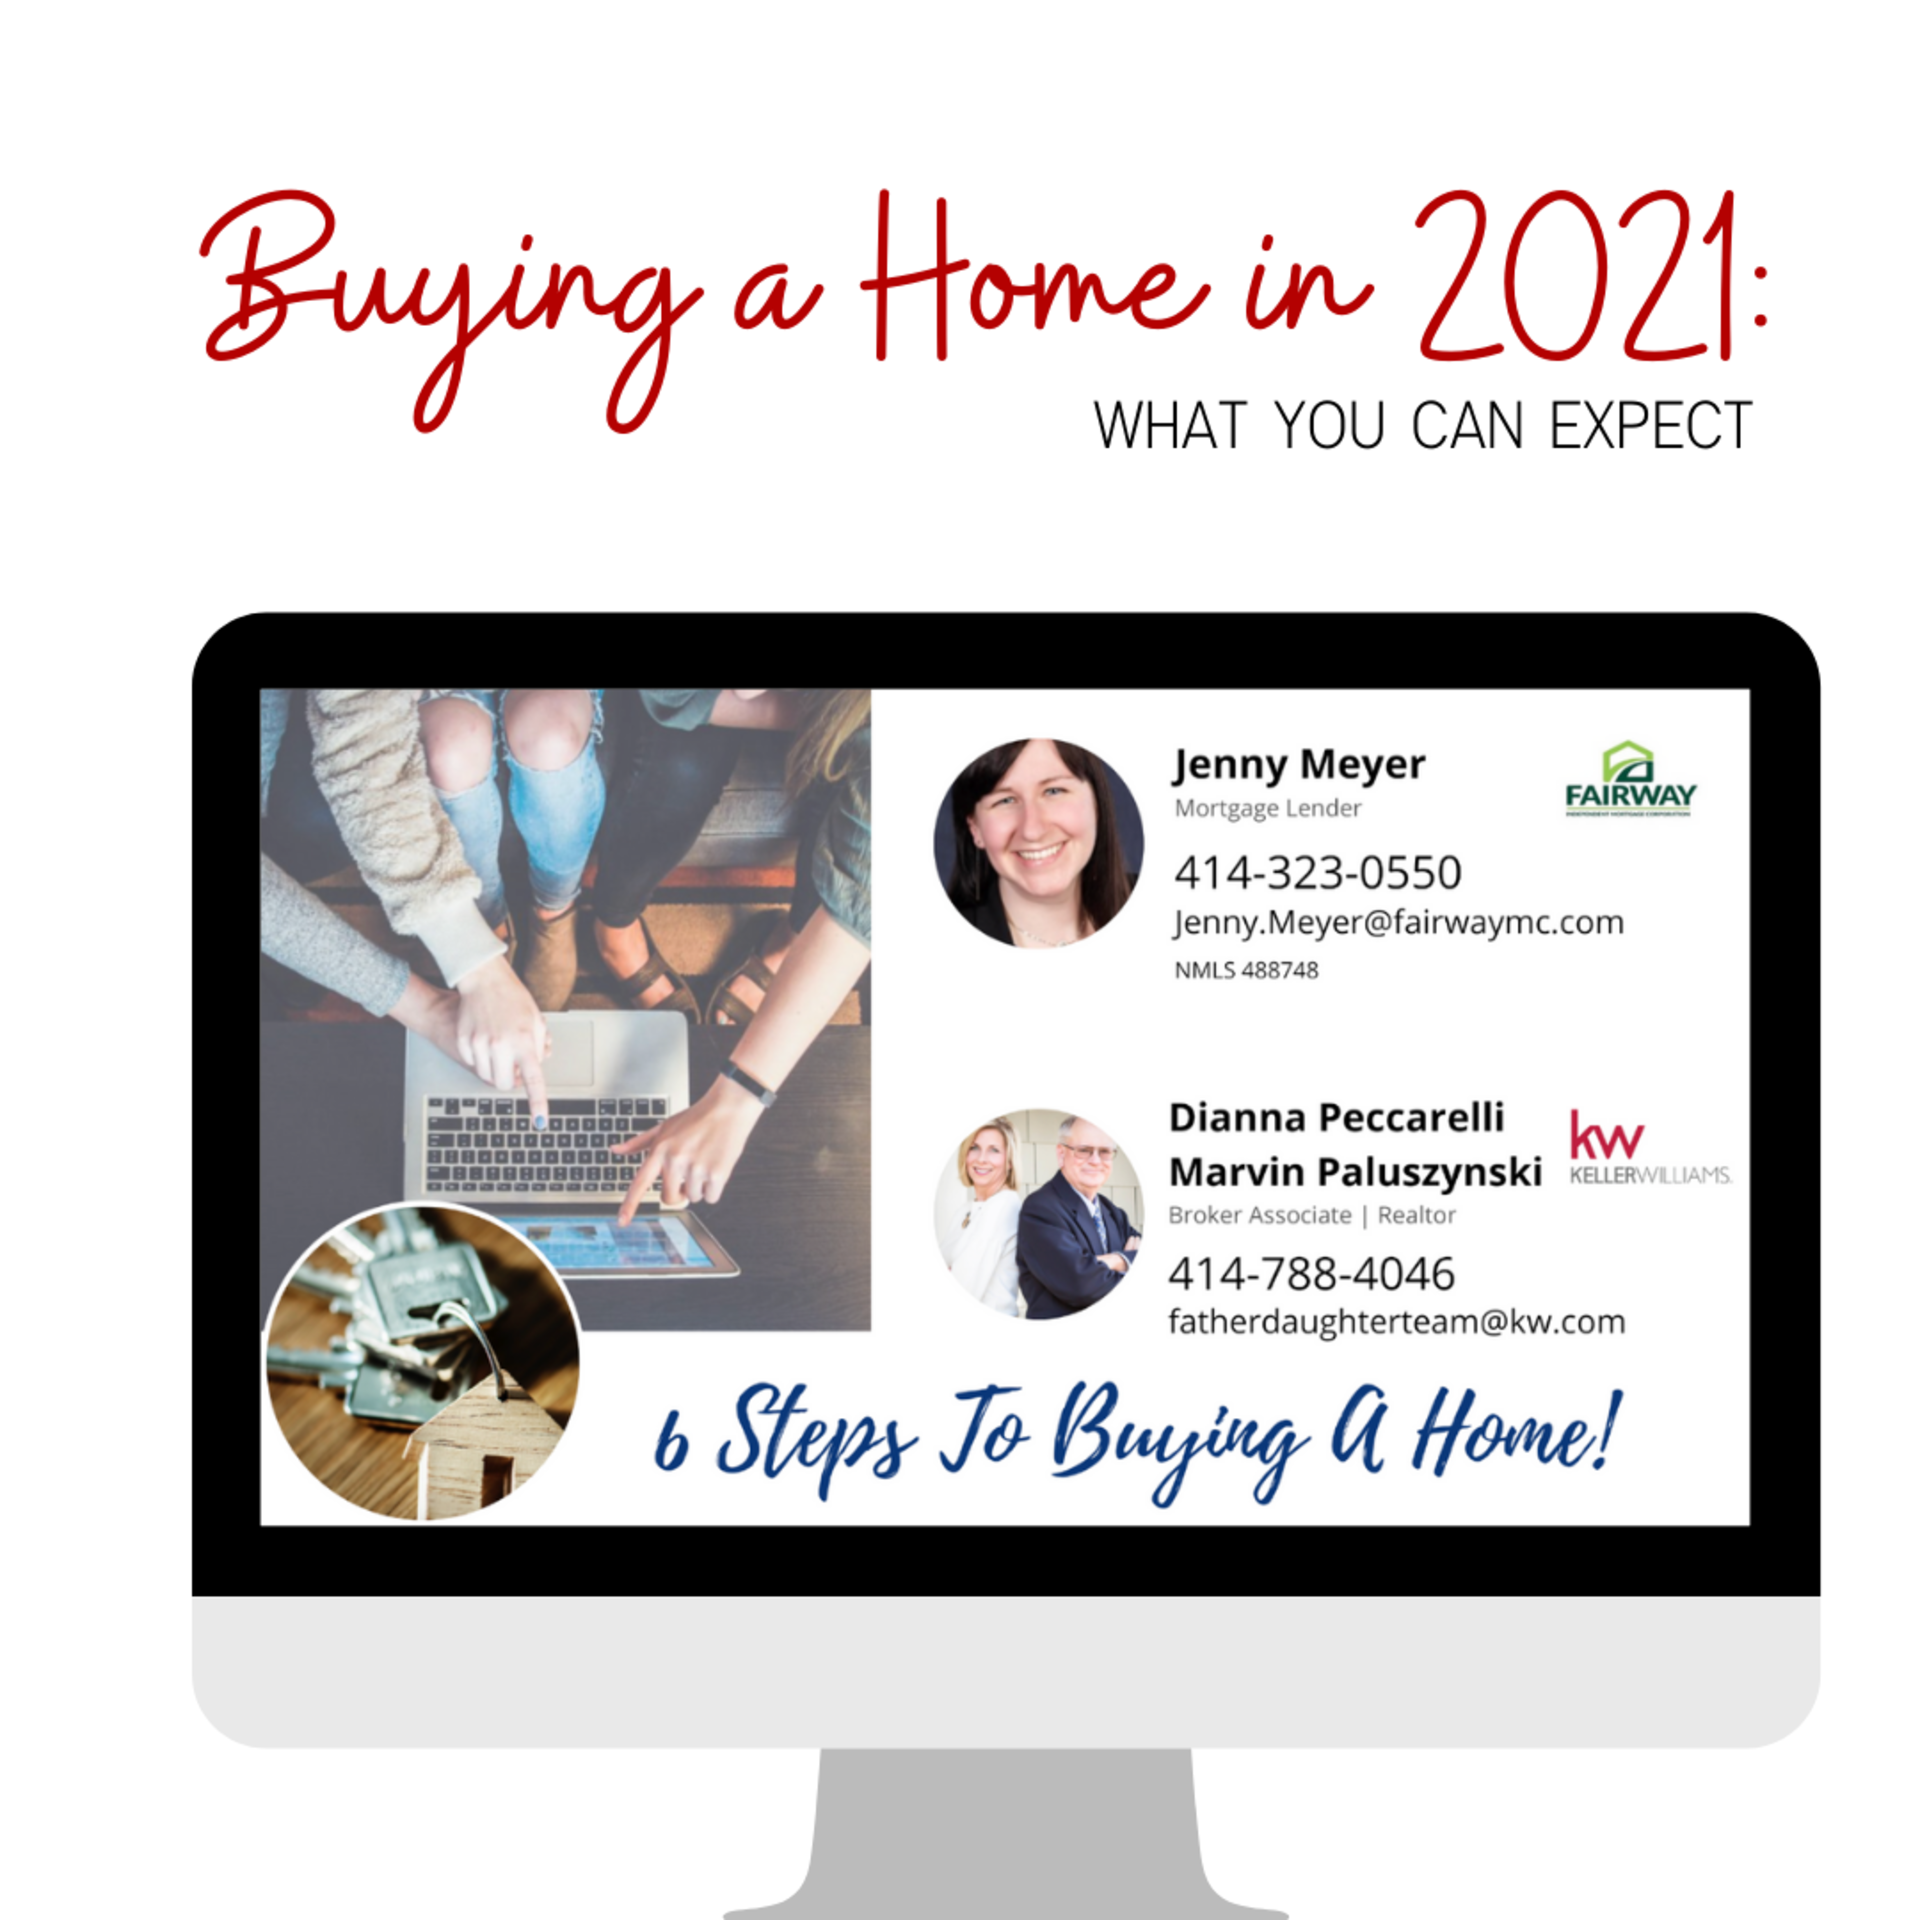 6 Steps To Buying A Home!